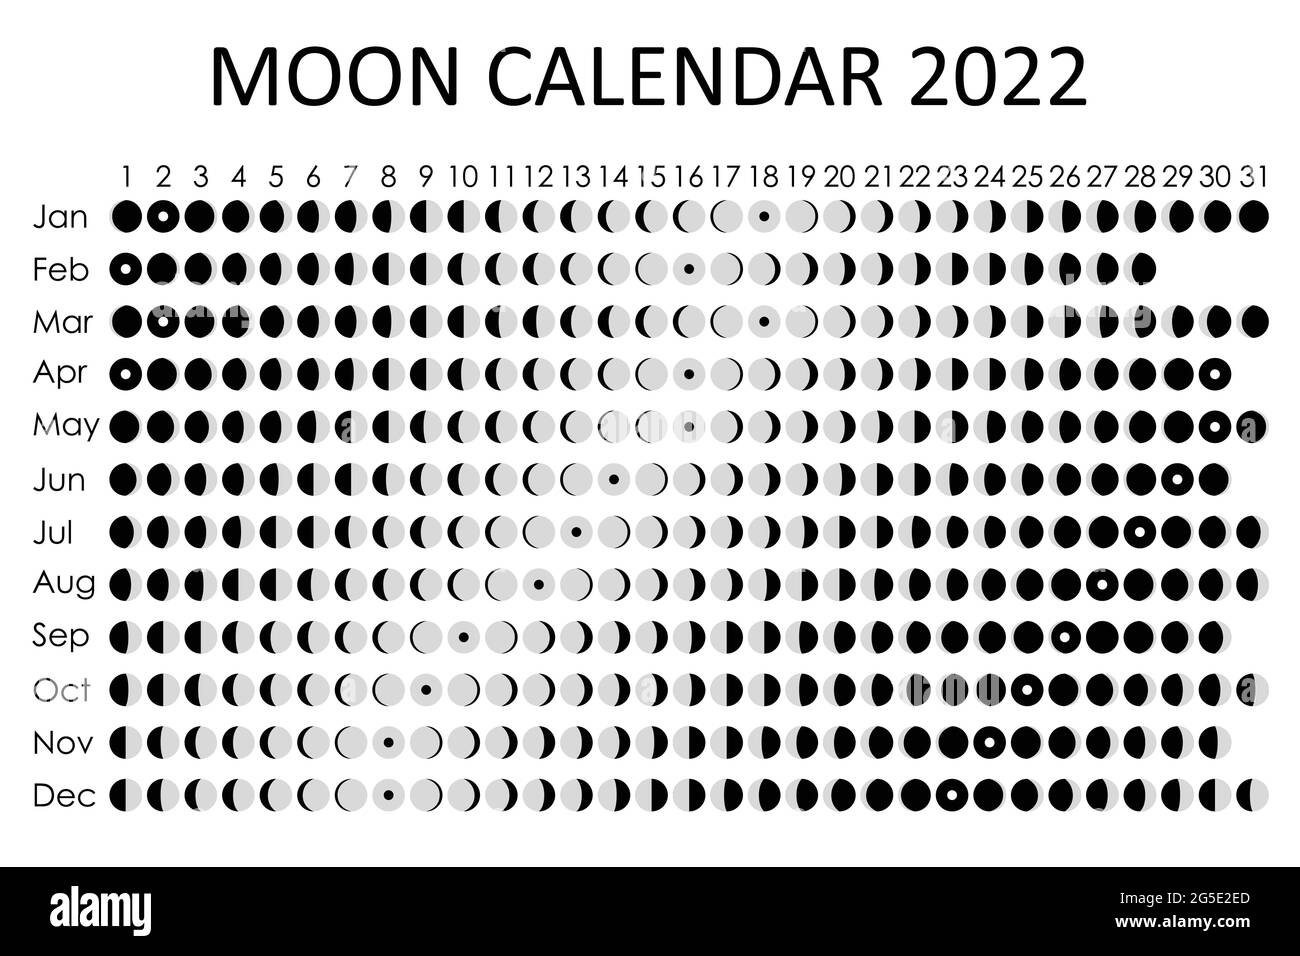 2022 Moon Calendar Astrological Calendar Design Planner Place For Stickers Month Cycle Planner Mockup Isolated Black And White Background Stock Vector Image Art Alamy